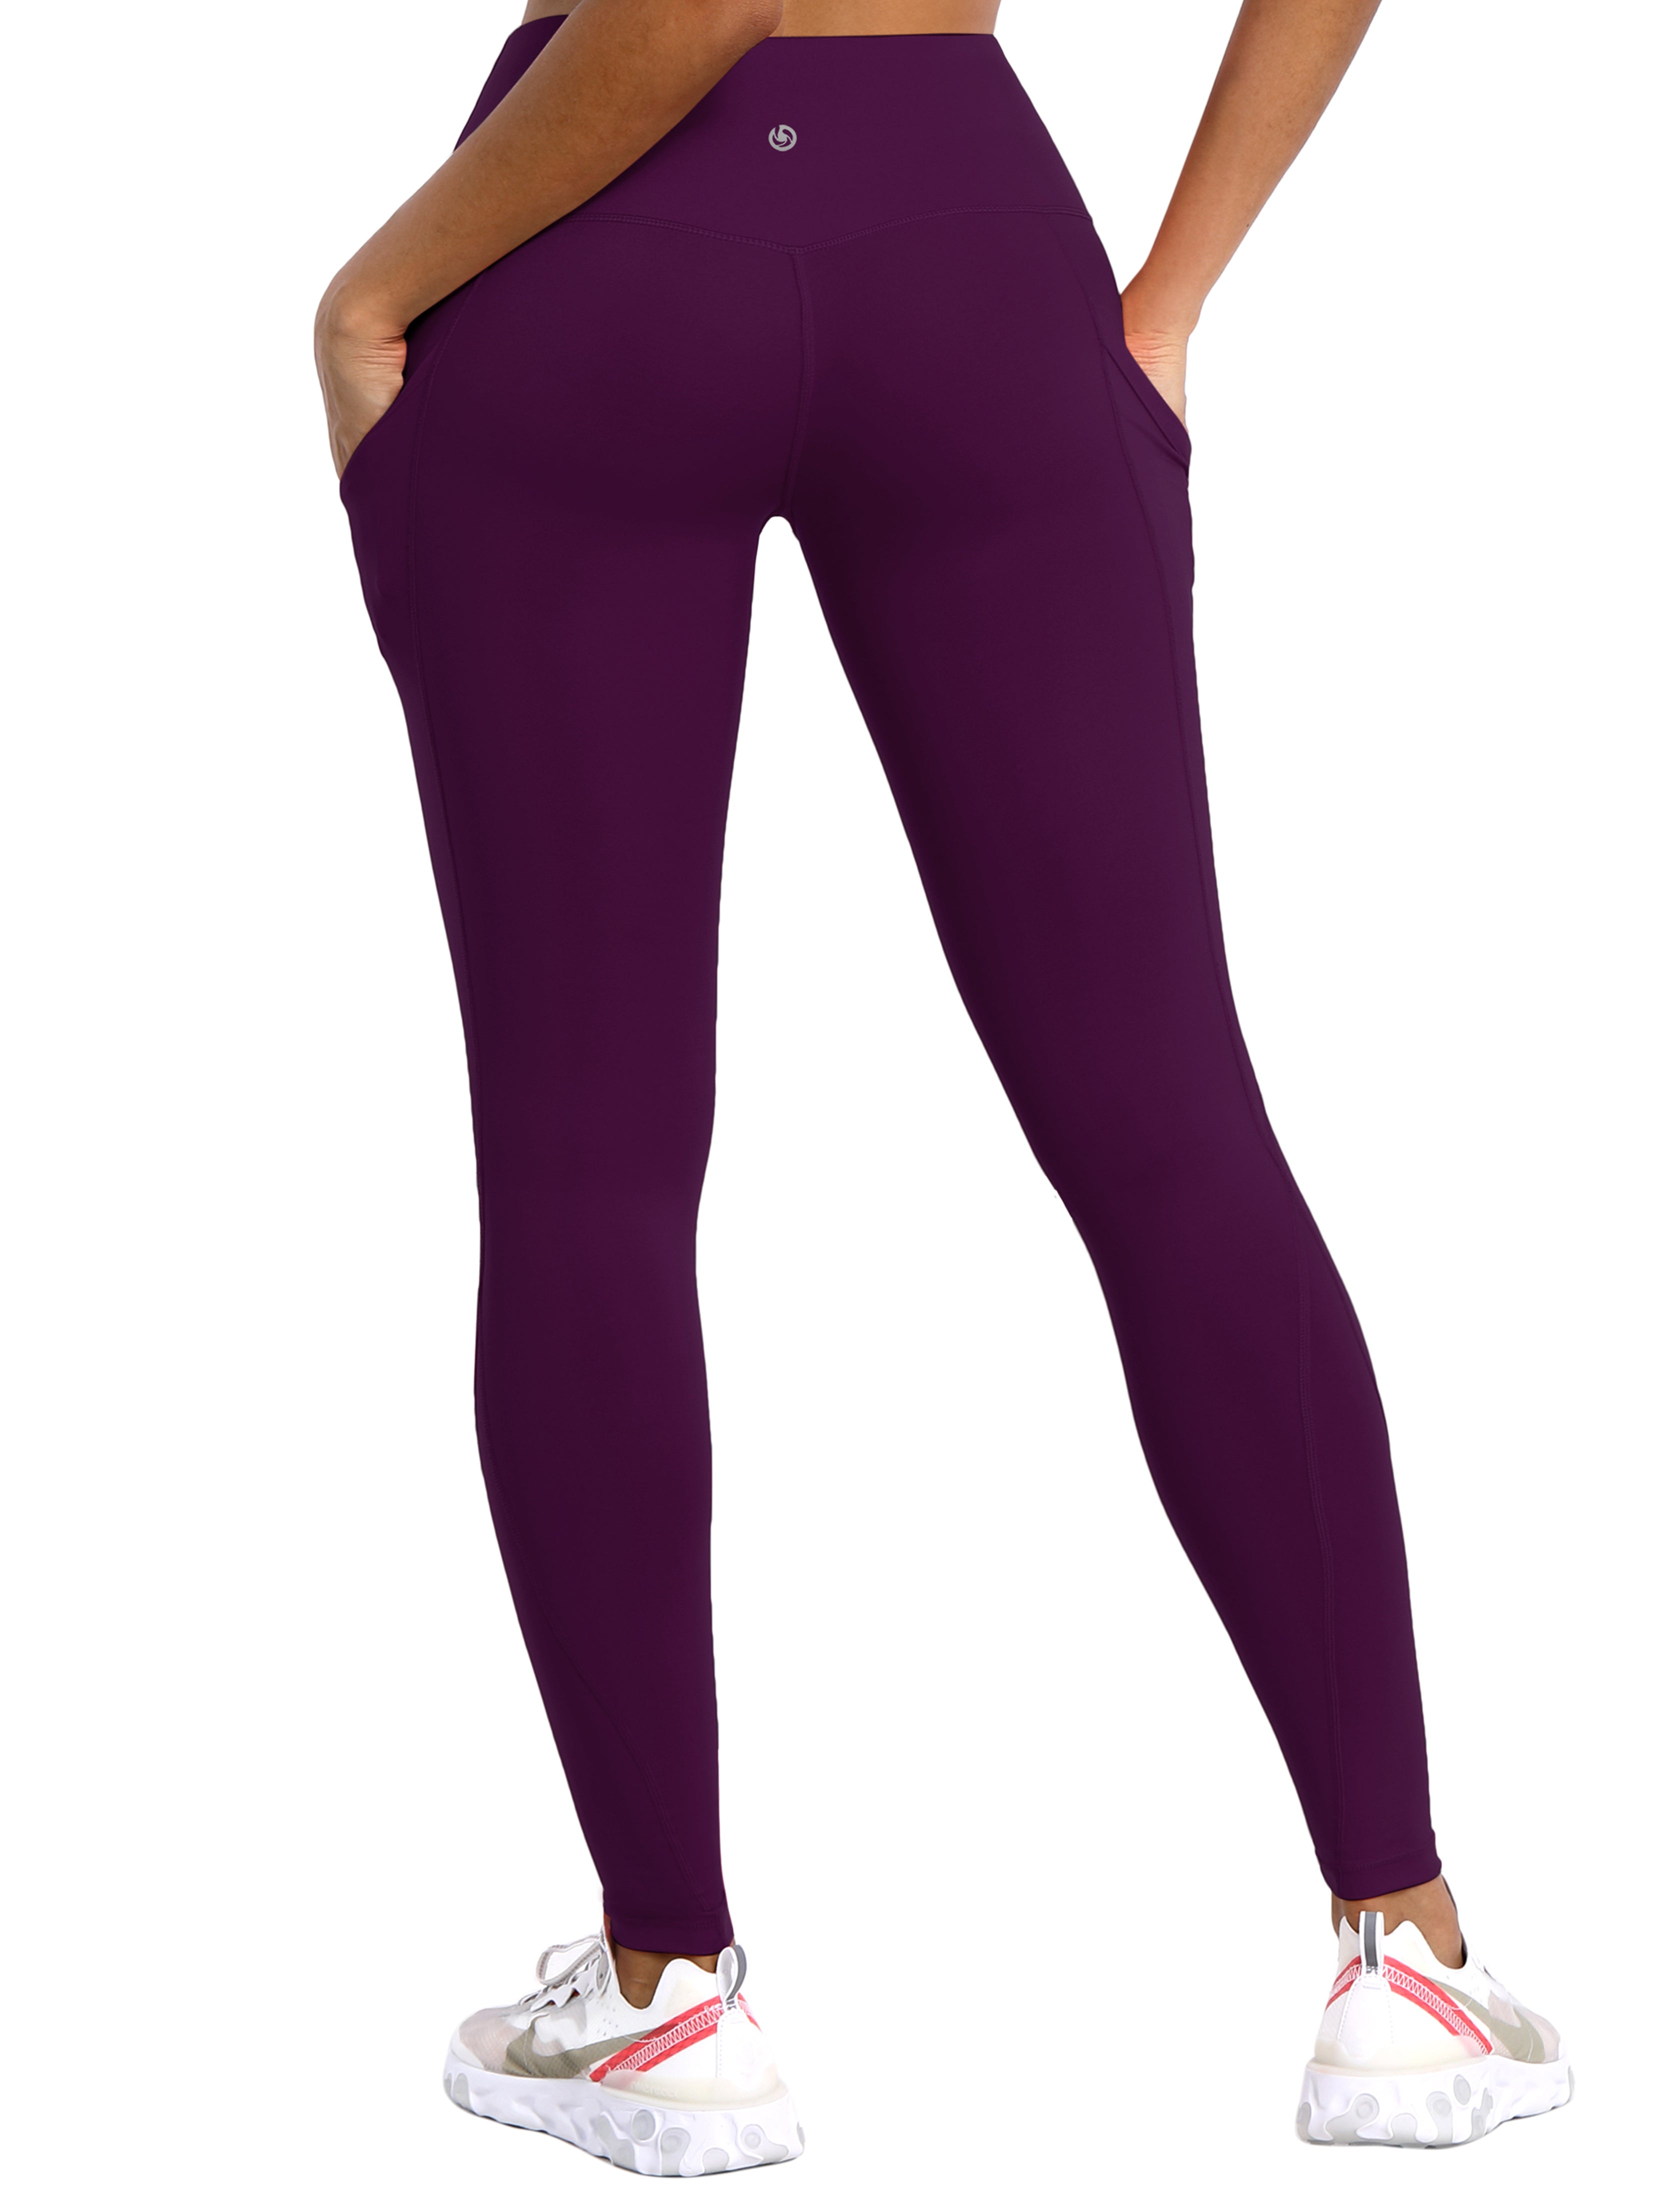 High Waist Side Pockets Jogging Pants plum 75% Nylon, 25% Spandex Fabric doesn't attract lint easily 4-way stretch No see-through Moisture-wicking Tummy control Inner pocket